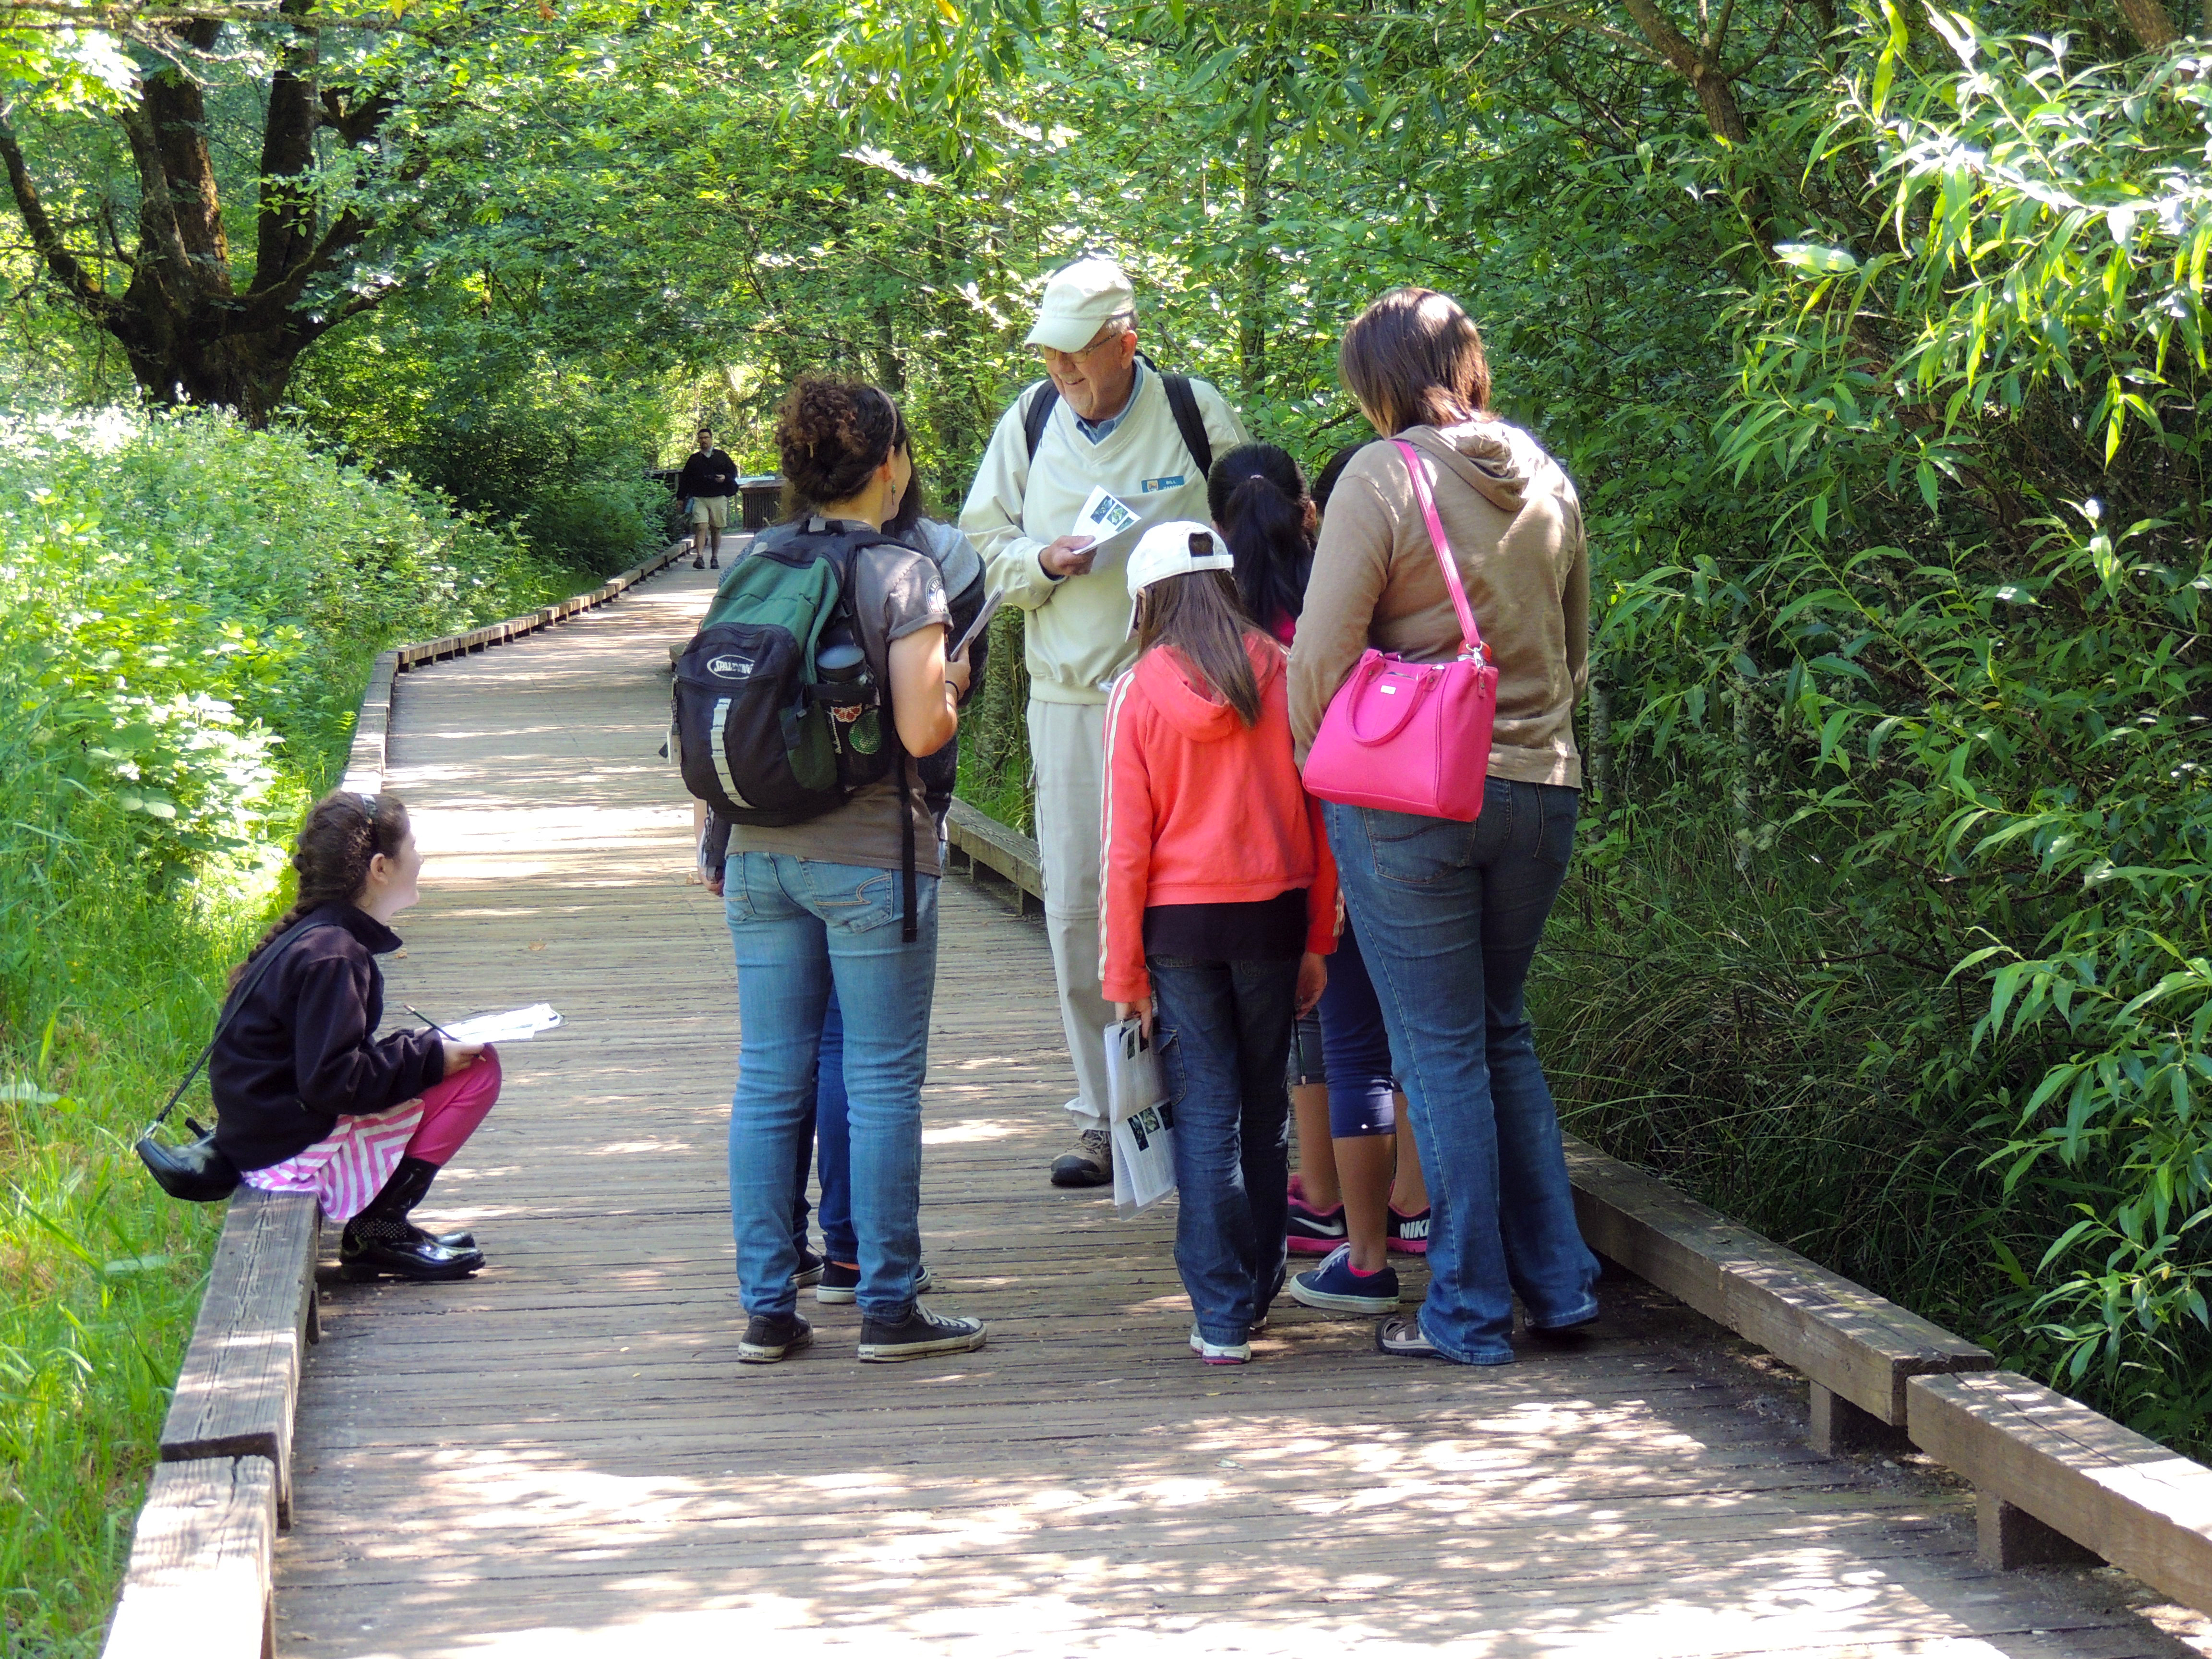 An older man in a white cap with a nametag smiles while talking with a small group of youth and another adult on a boardwalk trail in a wooded area.